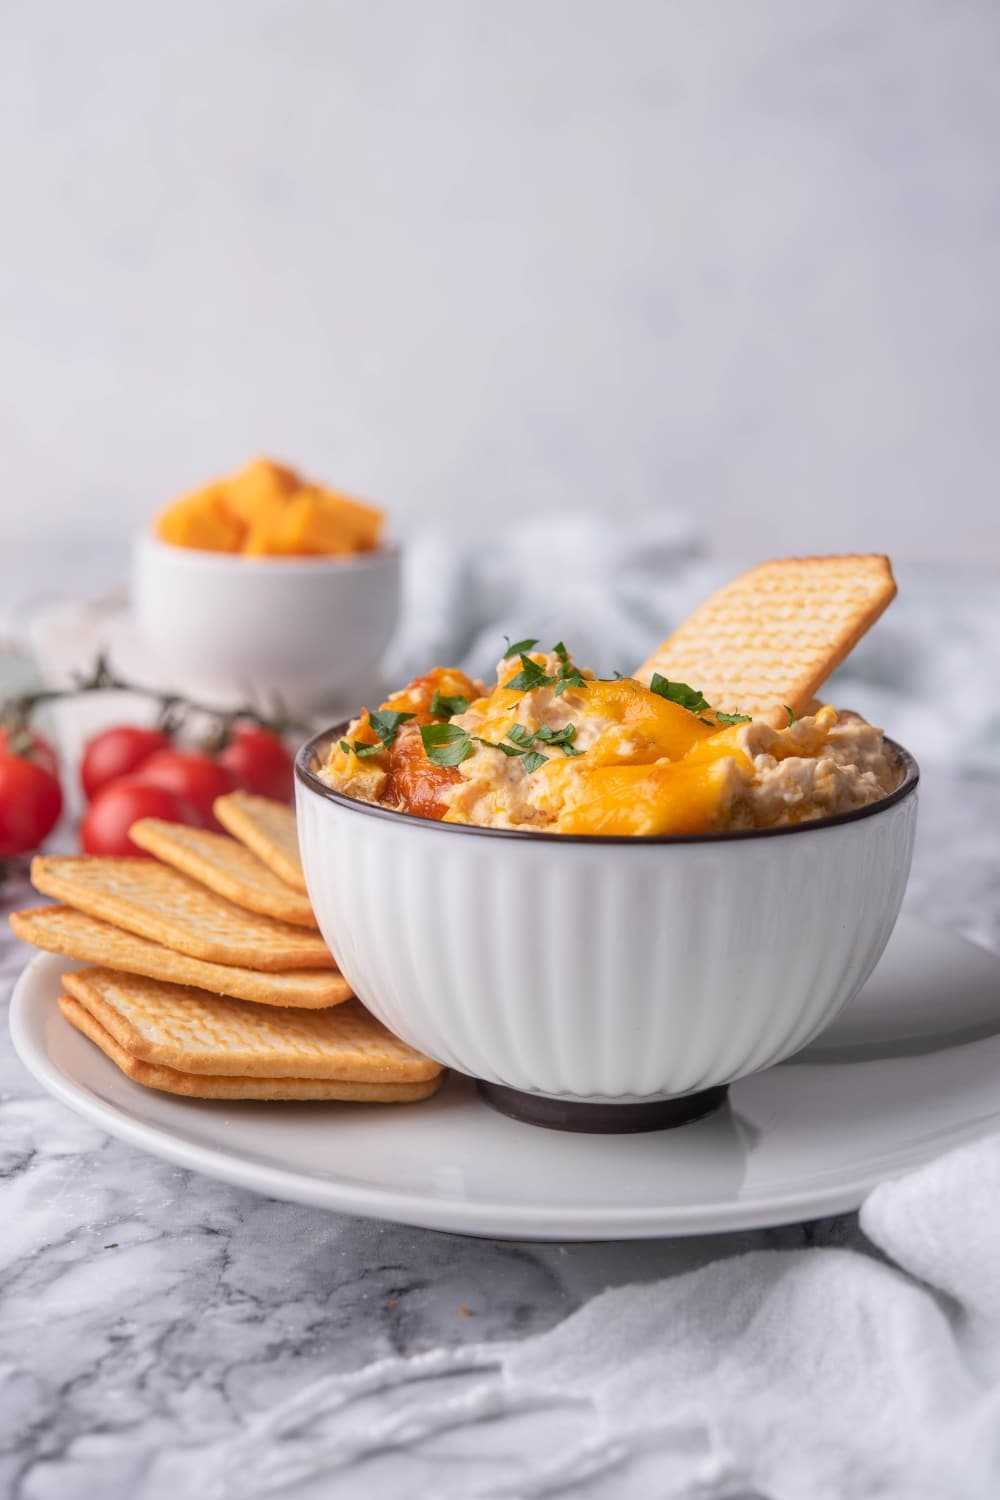 Chicken dip garnished with parsley in a bowl. A cracker is dipped halfway into the dip and the bowl is on a plate with more crackers.